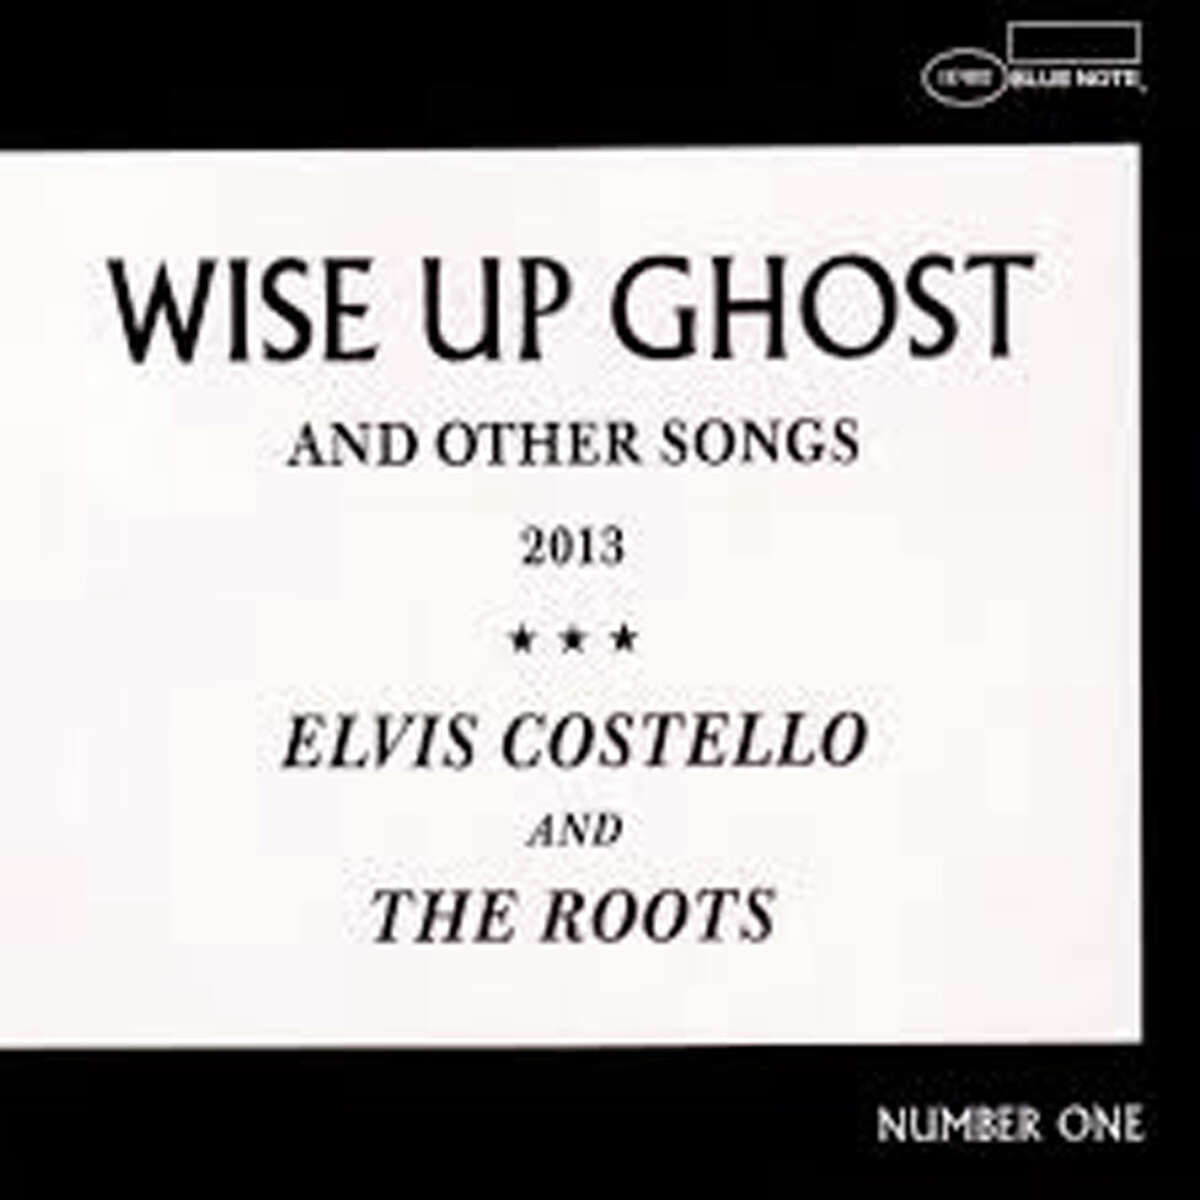 The other Elvis, Elvis Costello, teams up with The Roots on "Wise Up Ghost."